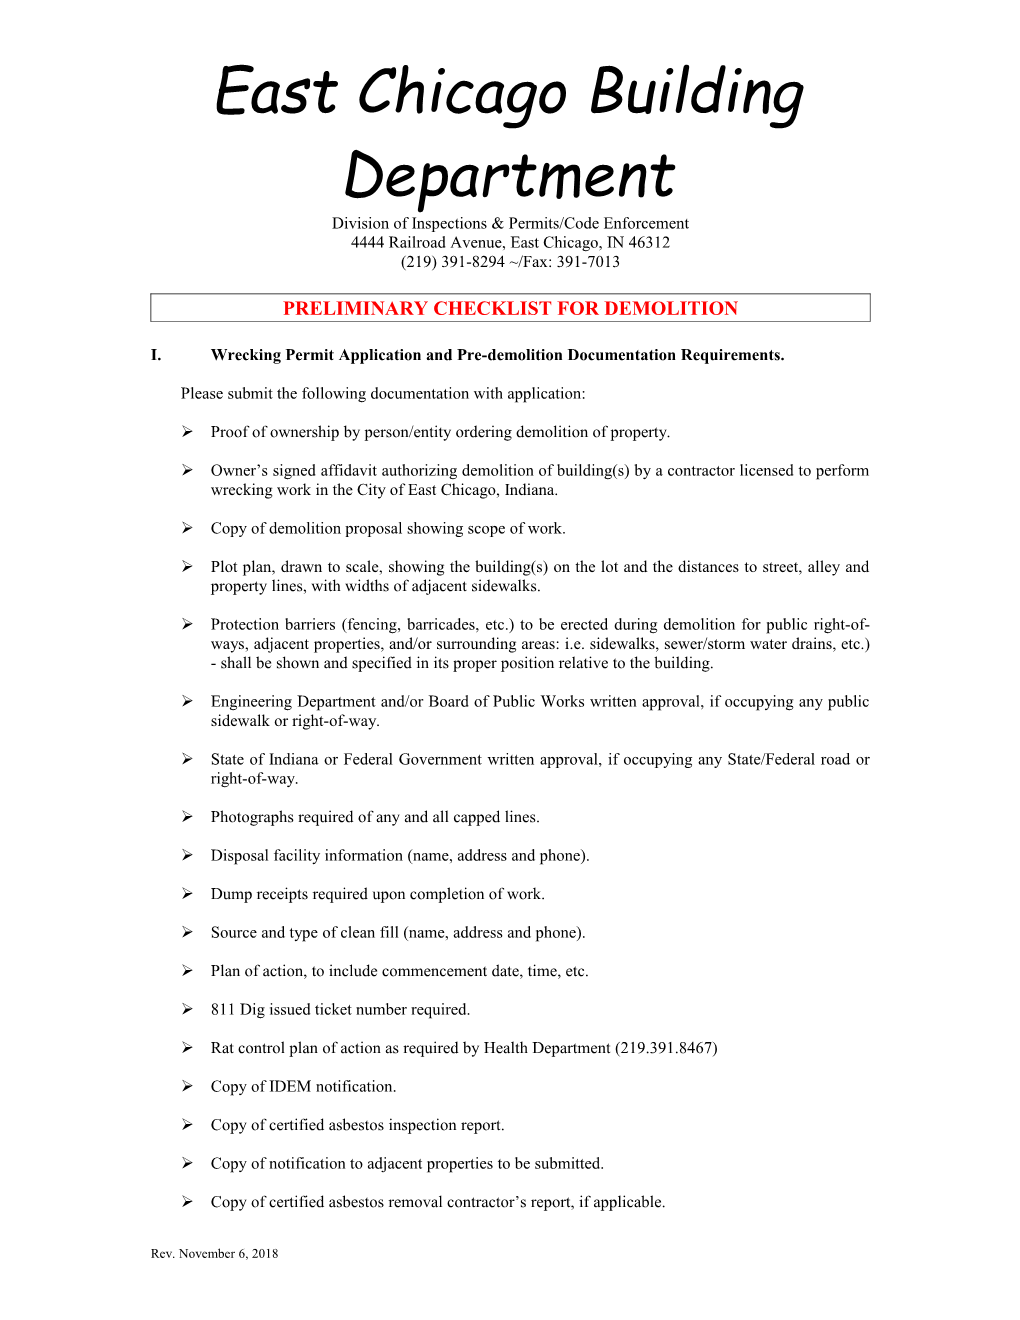 Checklist for Demolition of Class I Buildings and Structures